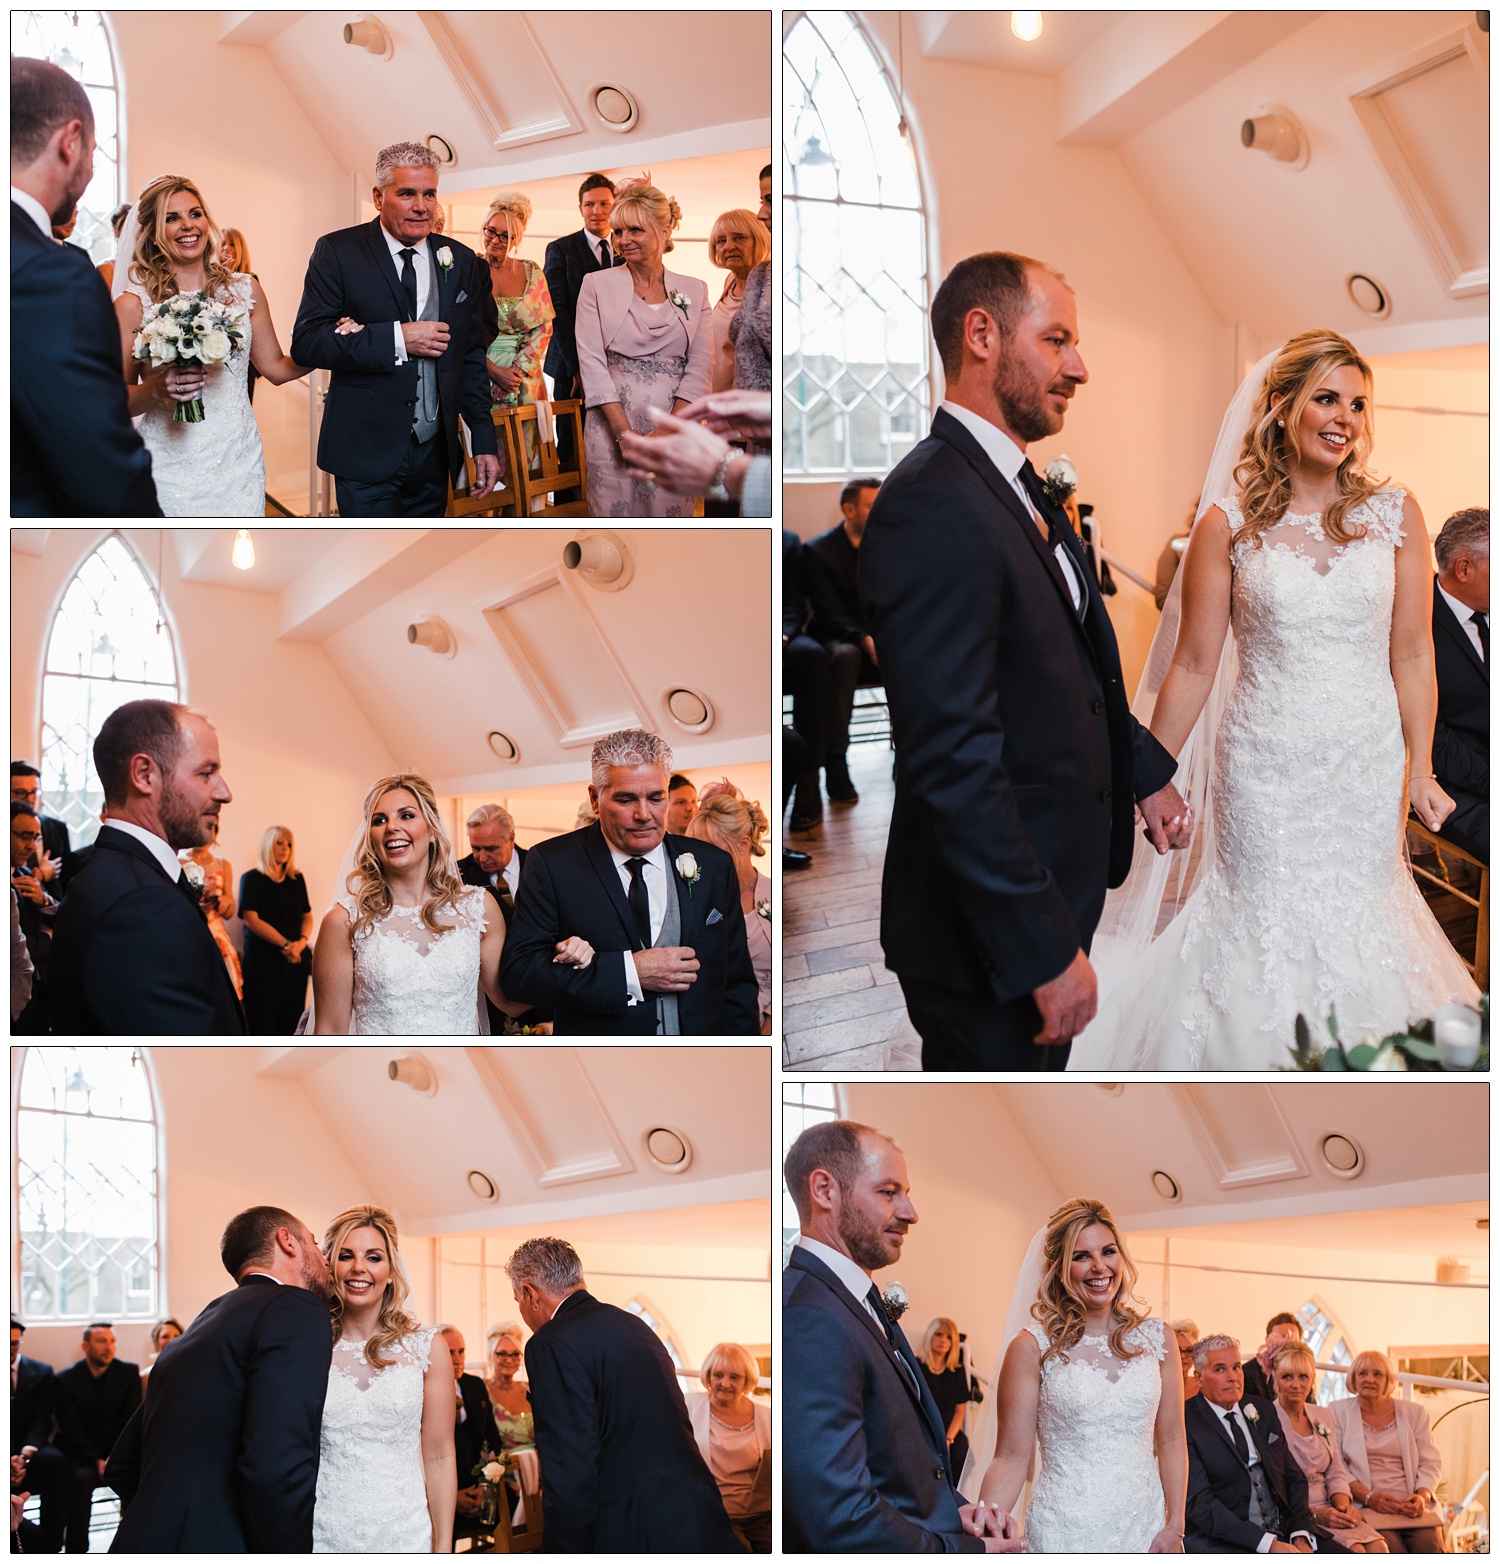 Bride and groom take their vows in the 'chapel' mezzanine of The Old Parish Rooms in Rayleigh. There's a pointed arch window and peach lighting.